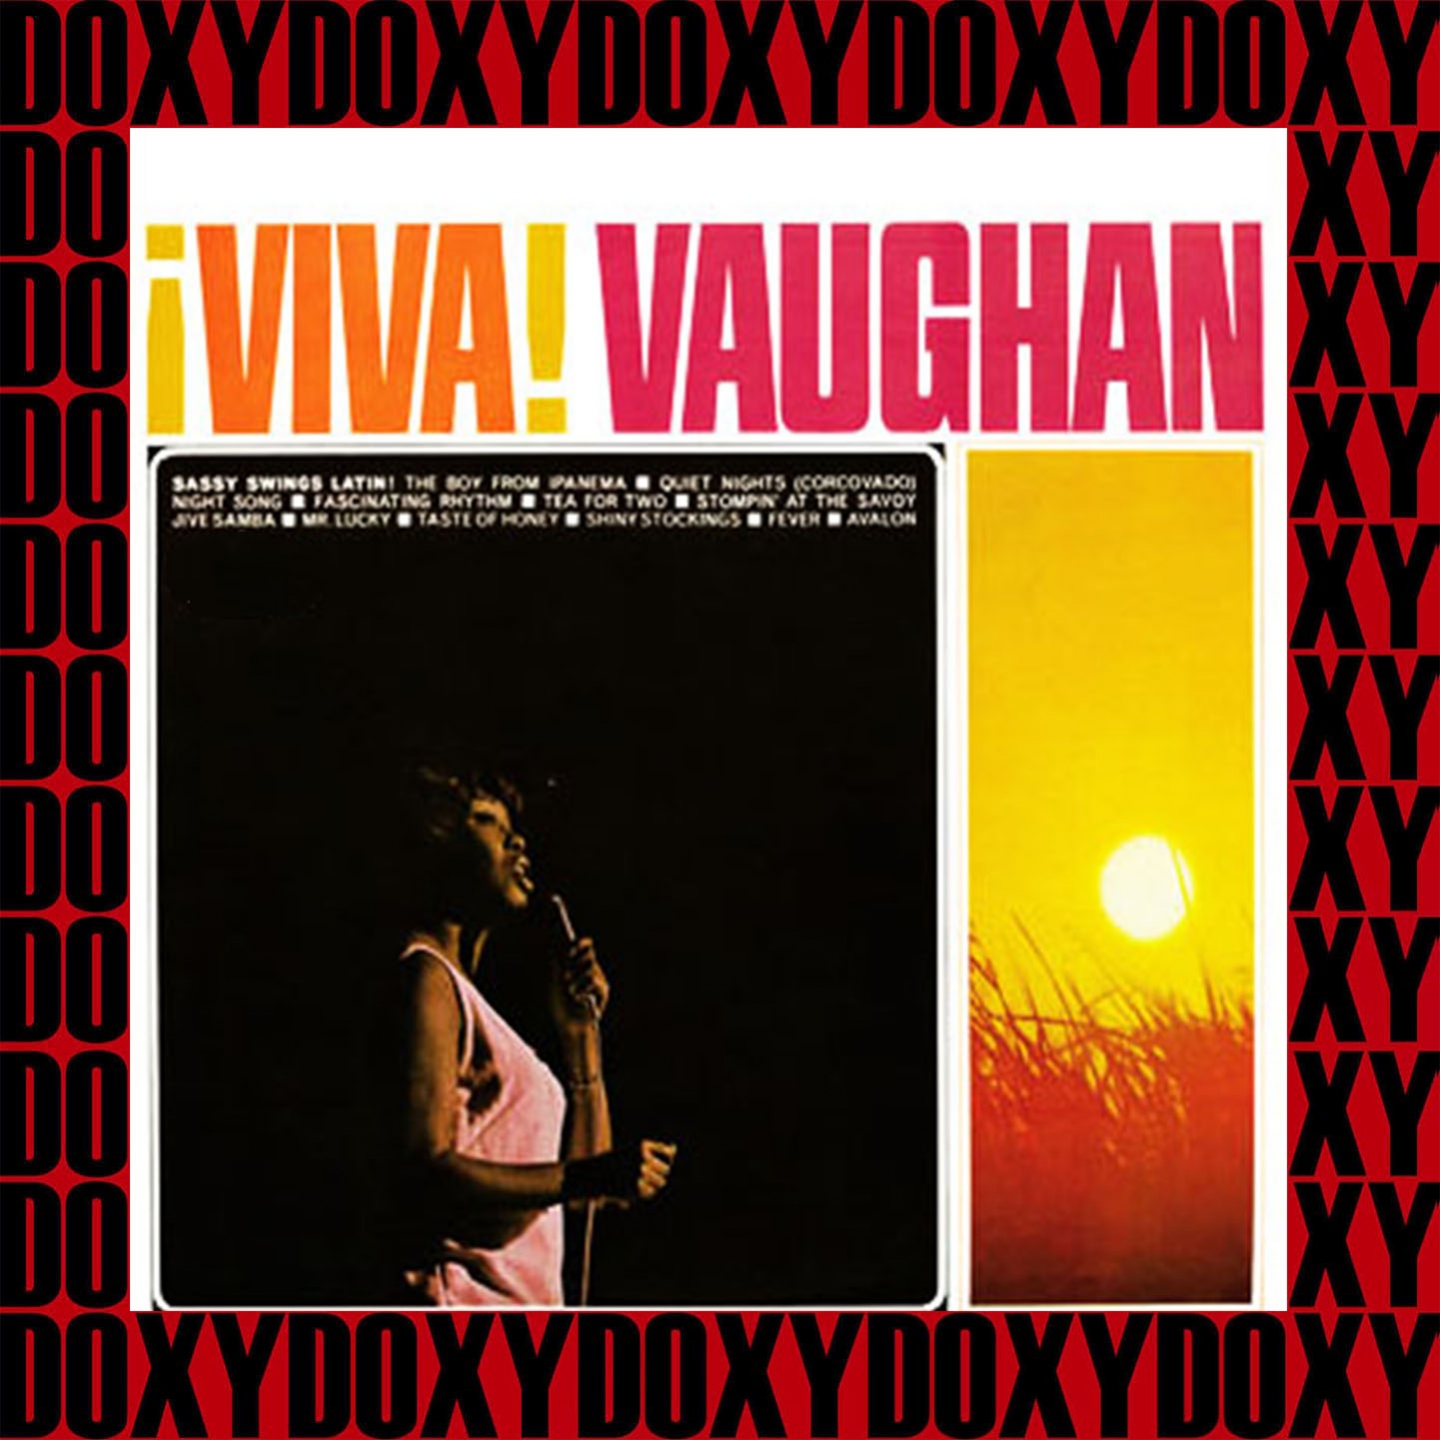 Viva! Vaughan (Remastered Version) (Doxy Collection)